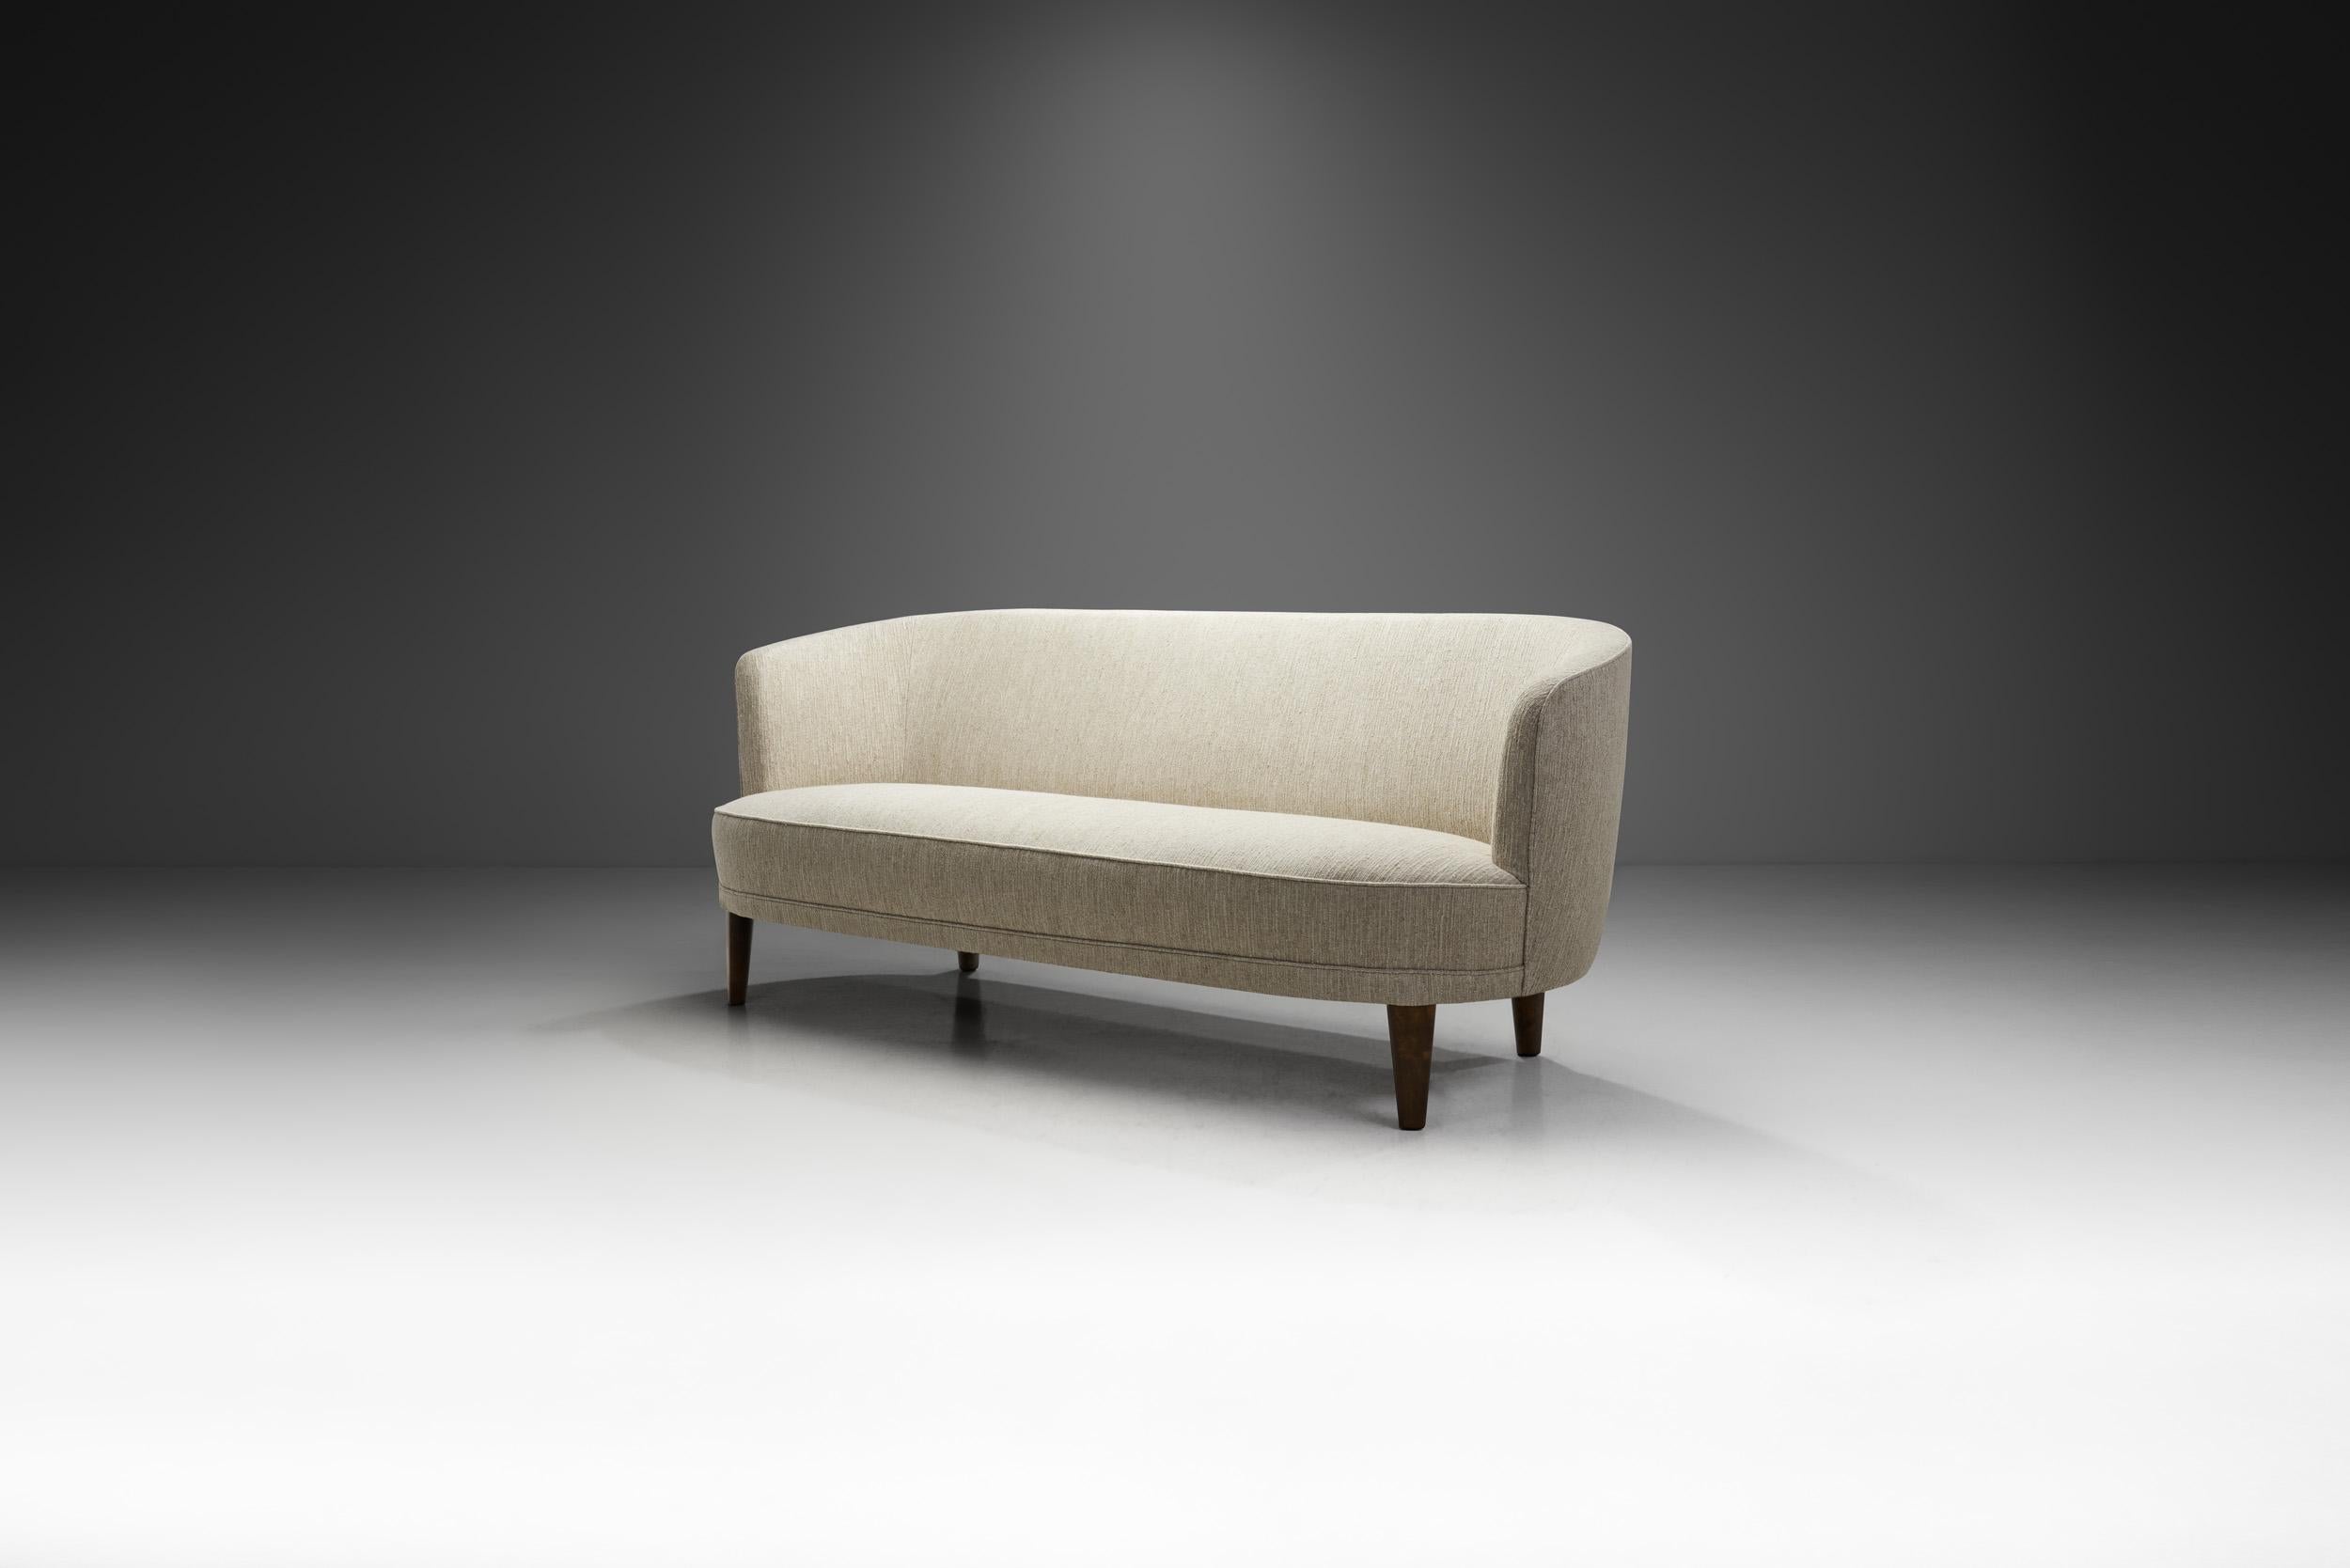 The “Berlin” three-seater sofa is “Malmstenesque” to its core. Designed in 1960, this sofa shows the designer’s predilection for traditional Swedish craftsmanship. Rejecting strict functionalism, his models are equipped with a cosy, welcoming